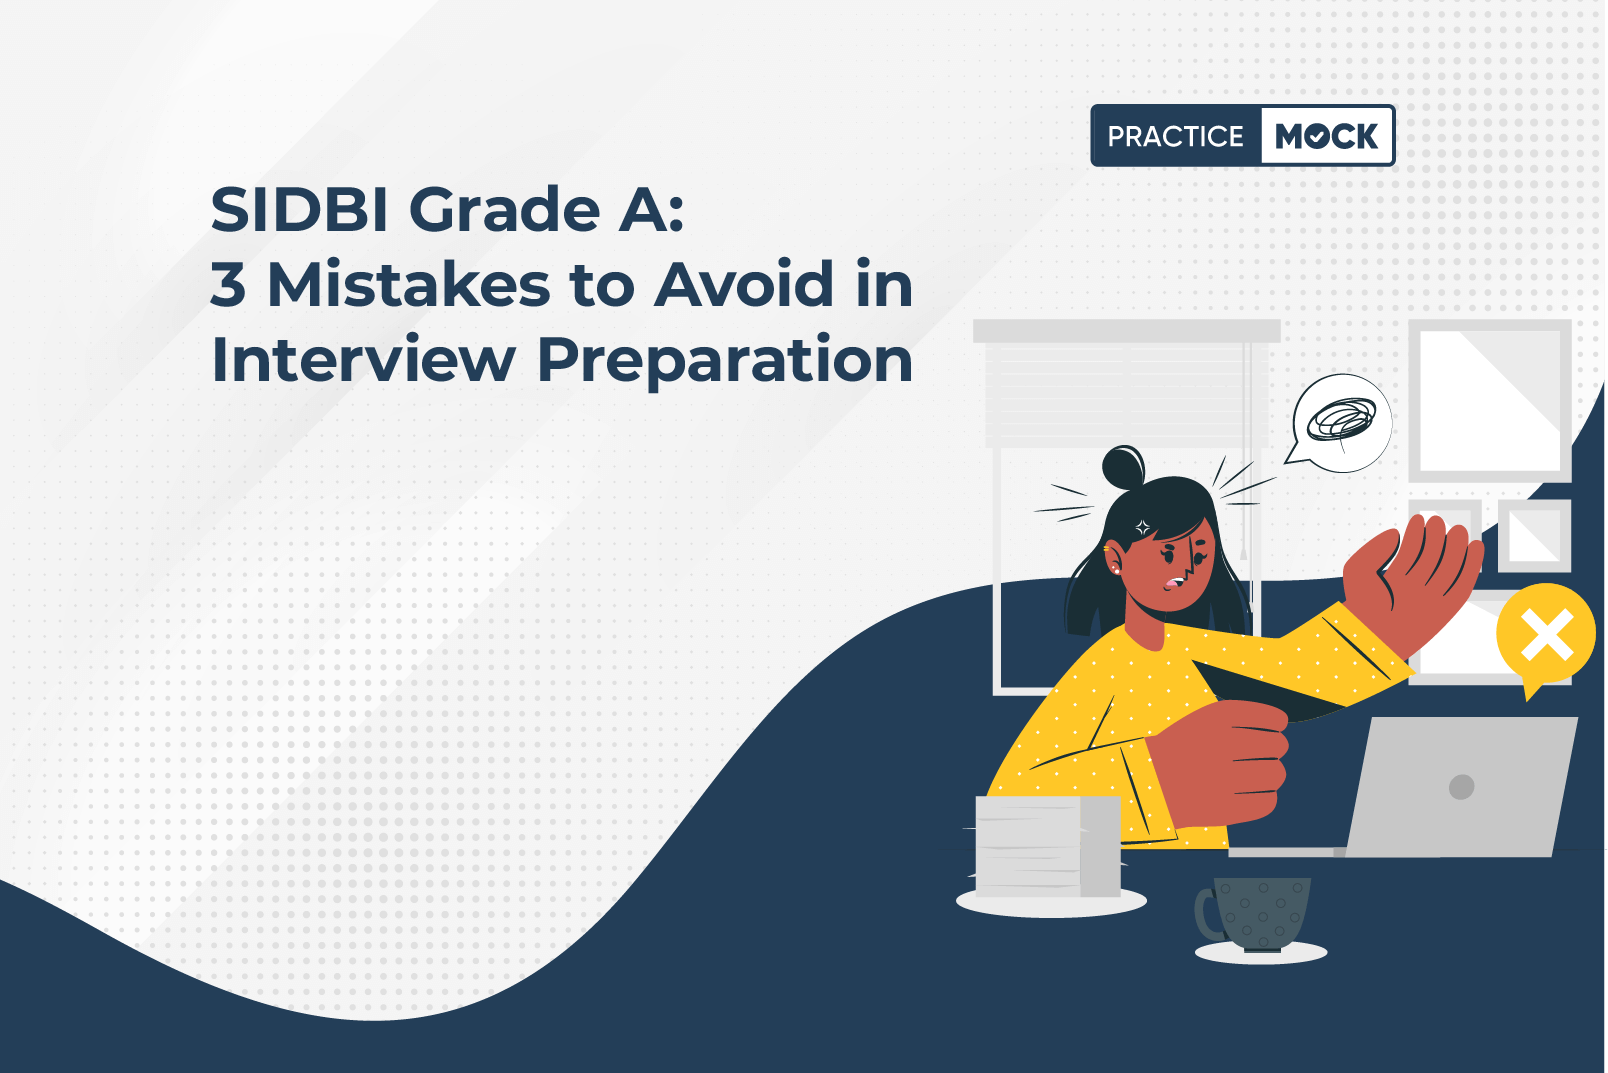 SIDBI Grade A 3 Mistakes to Avoid in Interview Preparation